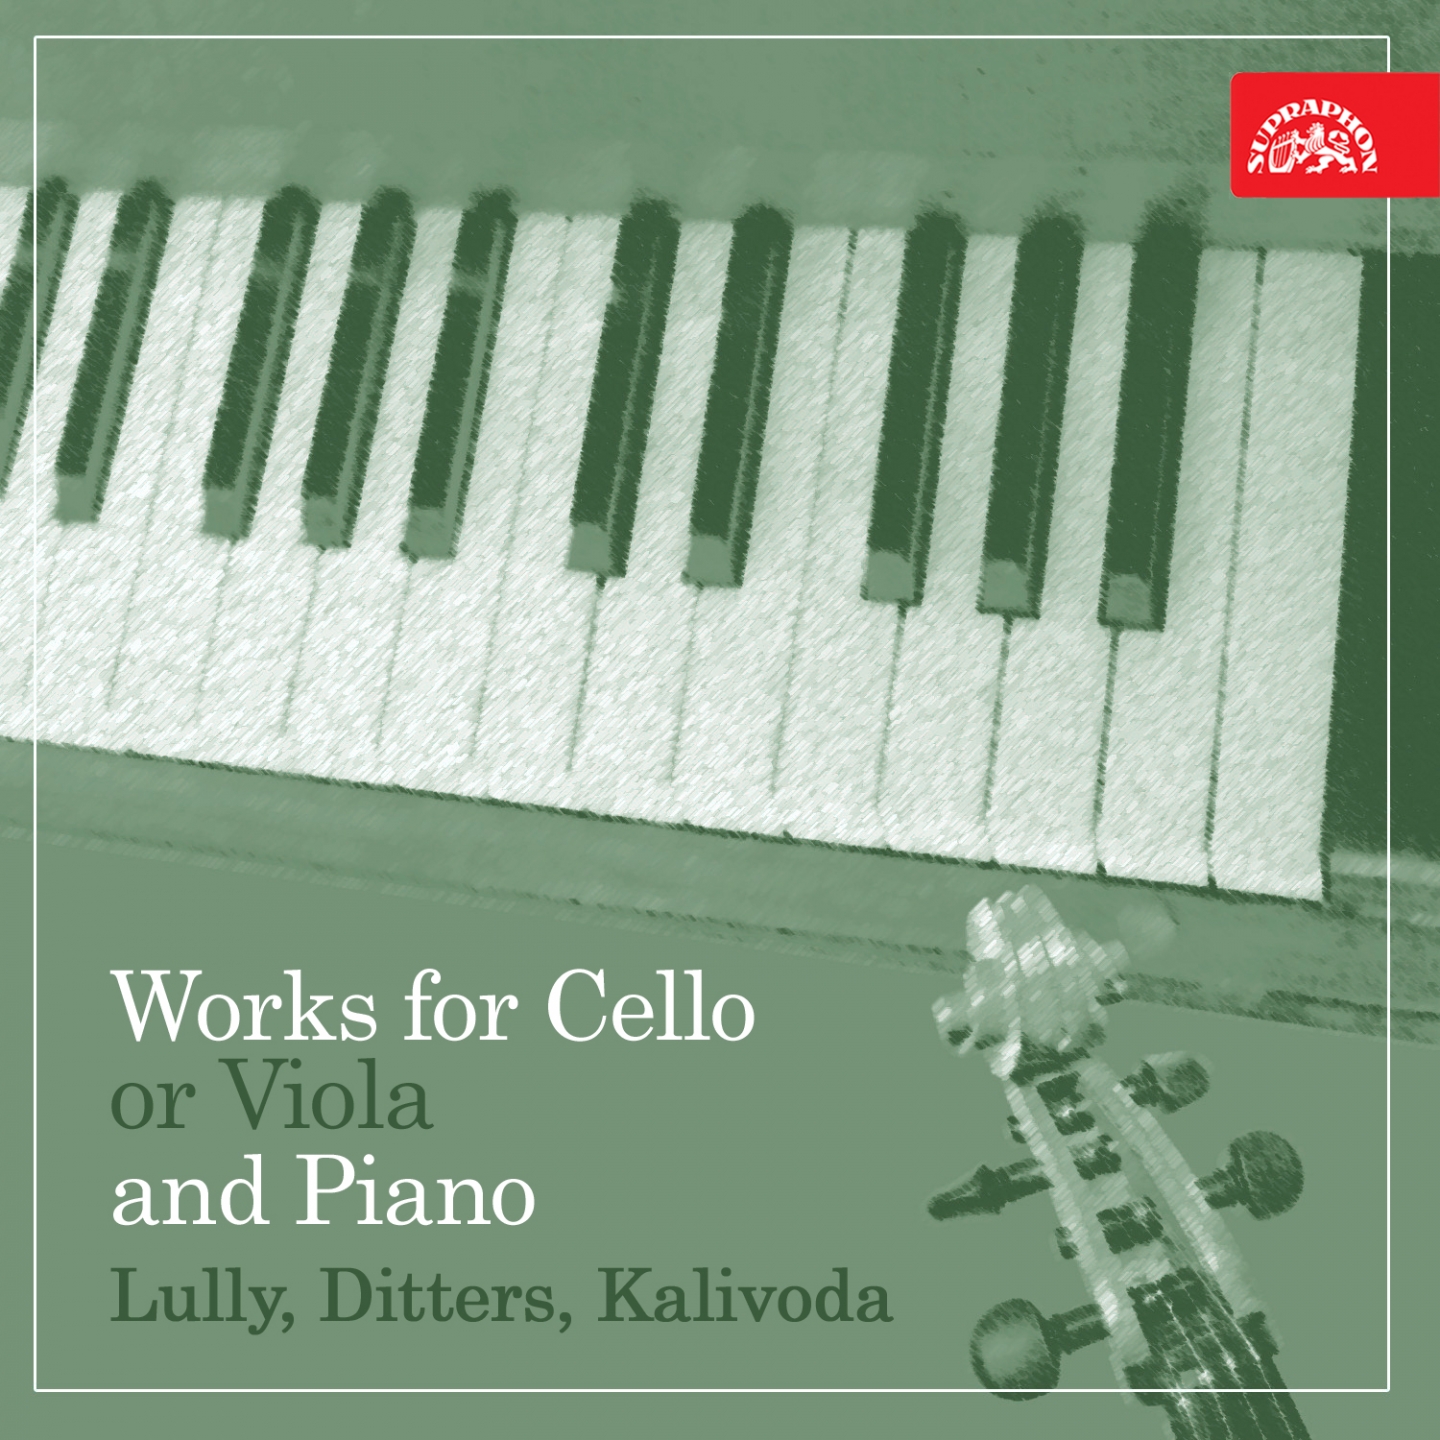 Nocturne for Viola and Piano, Op. 186, .: No. 1 Larghetto